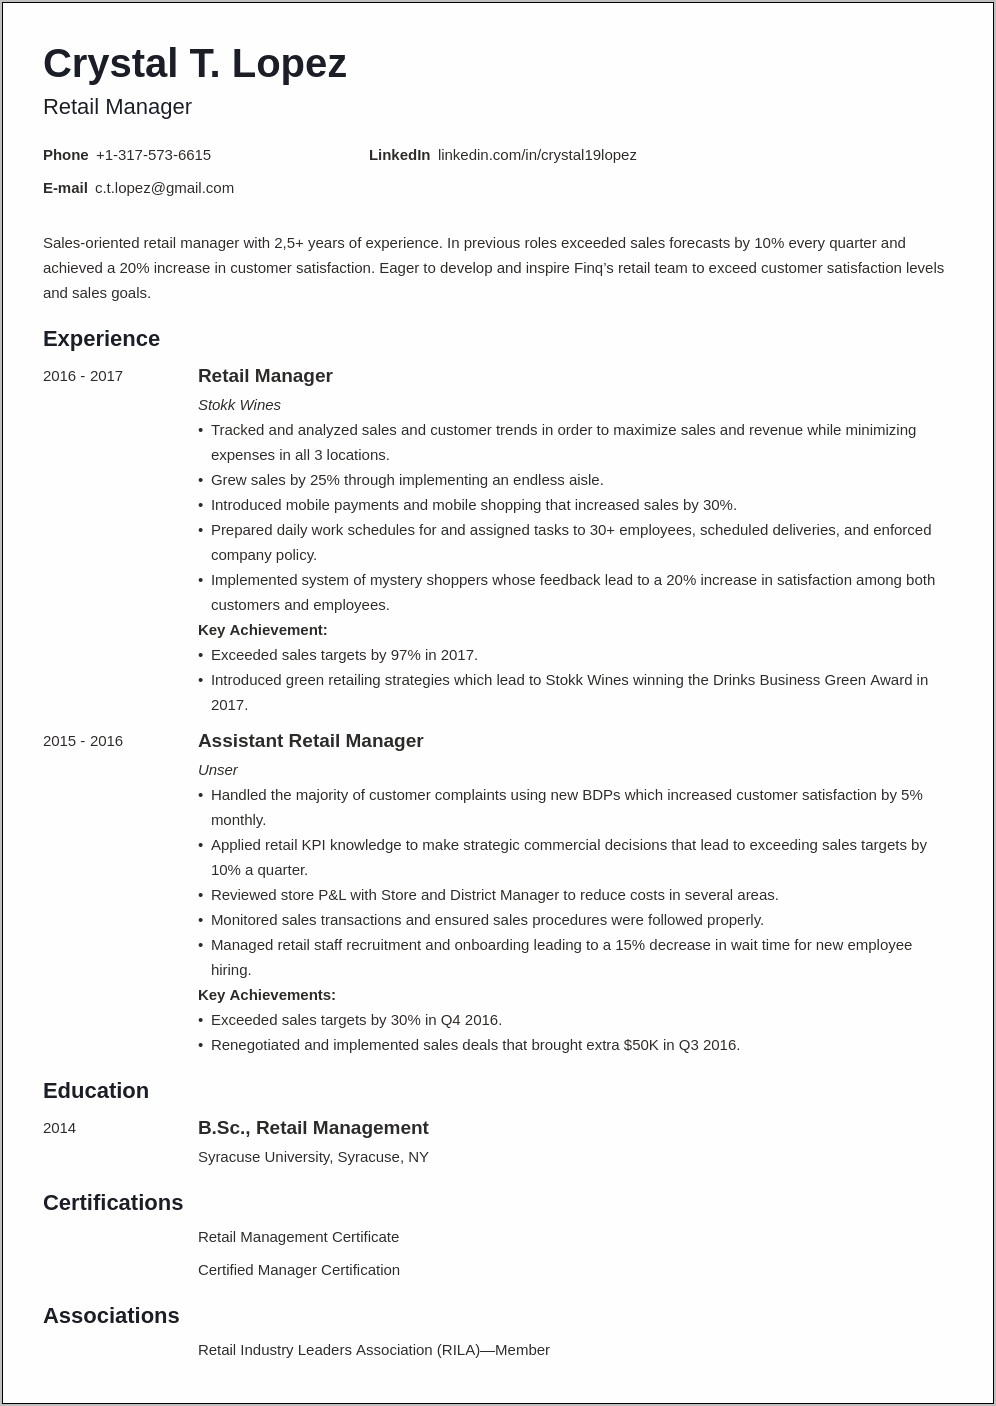 Resume Career Objective Examples Retail